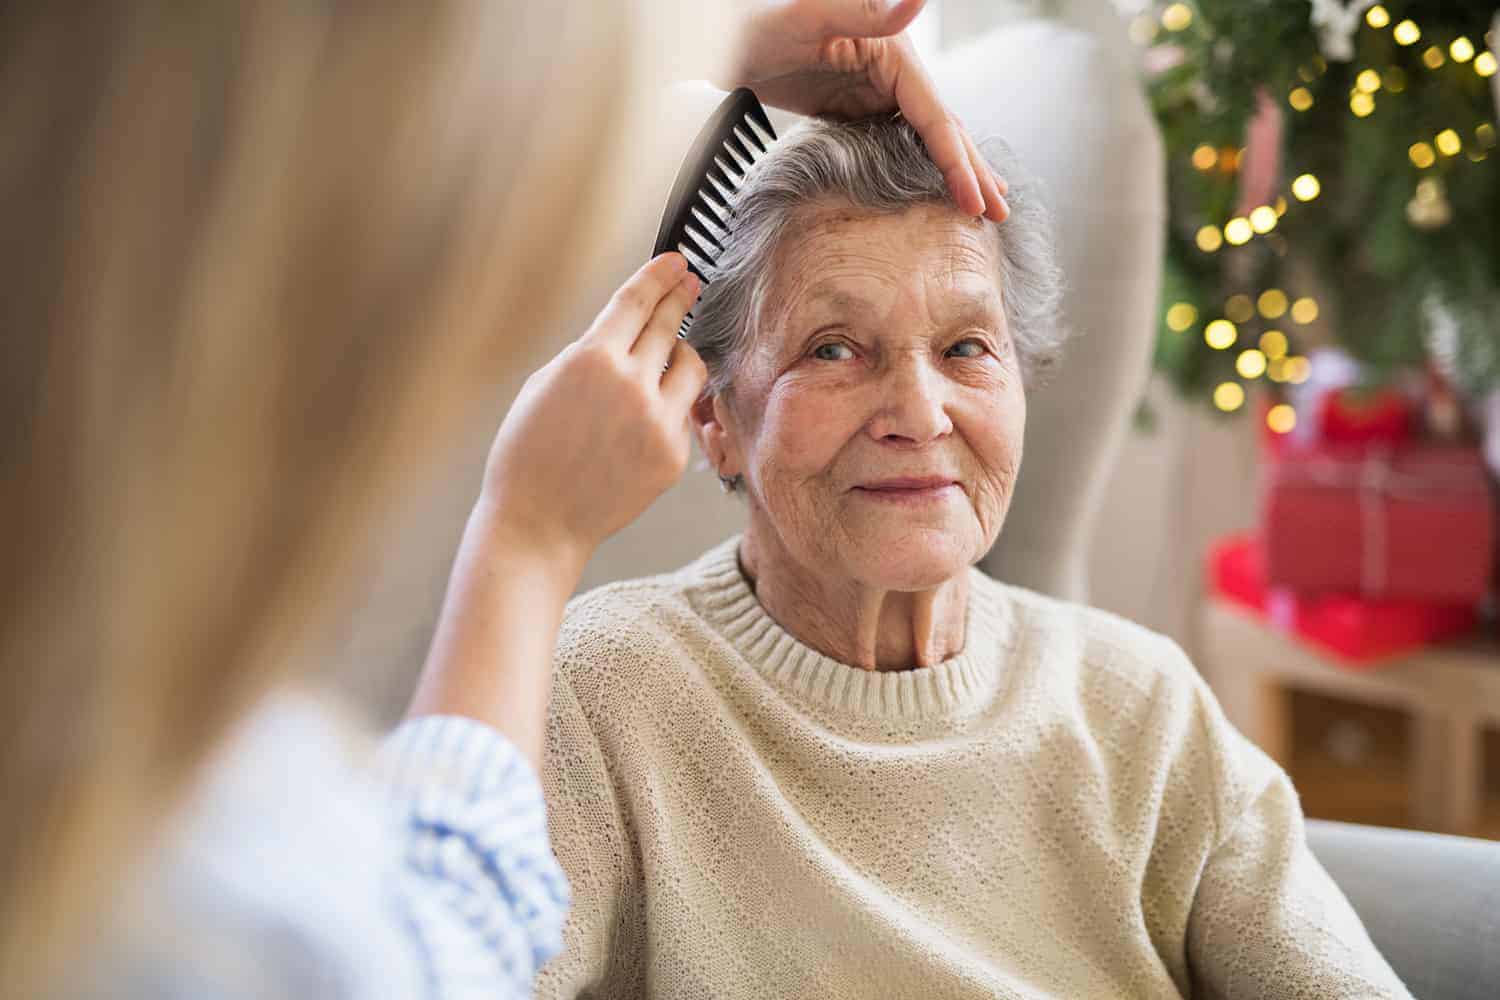 A Personal Care moment: a younger individual tenderly combs the hair of a smiling elderly woman, creating a picture of intergenerational kindness and love.